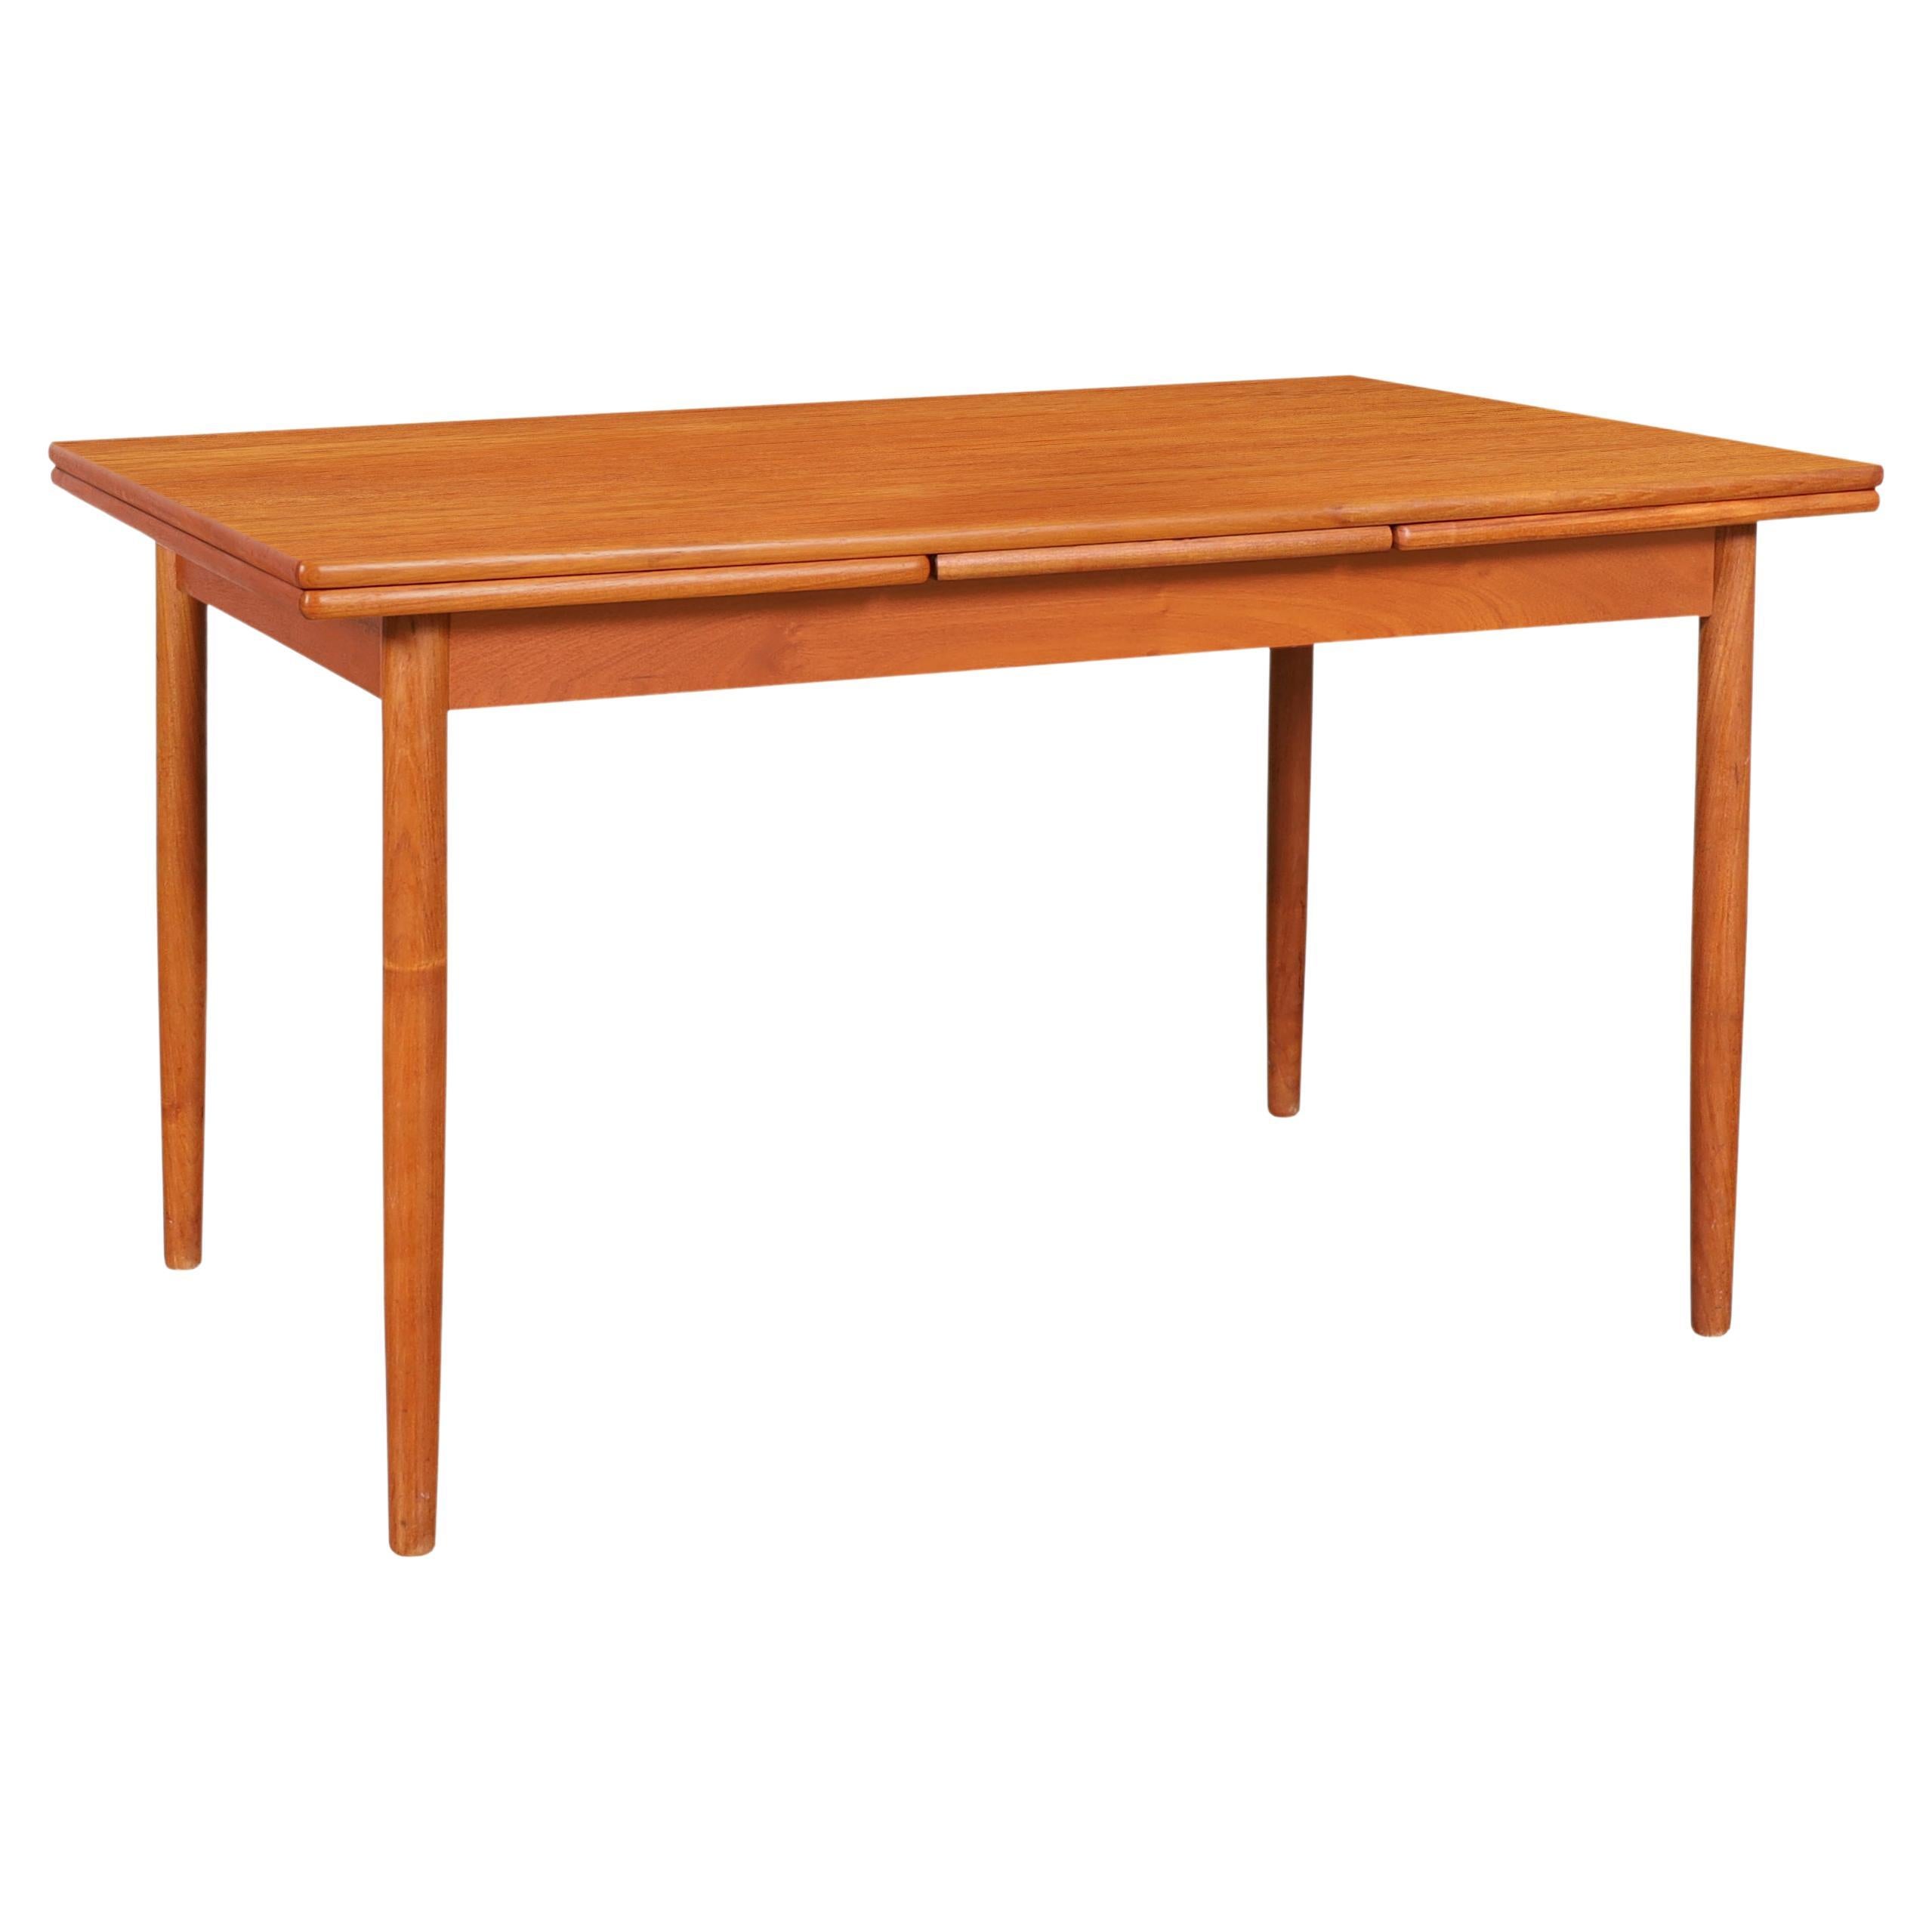 Danish Modern Expanding Teak Dining Table by AM Møble